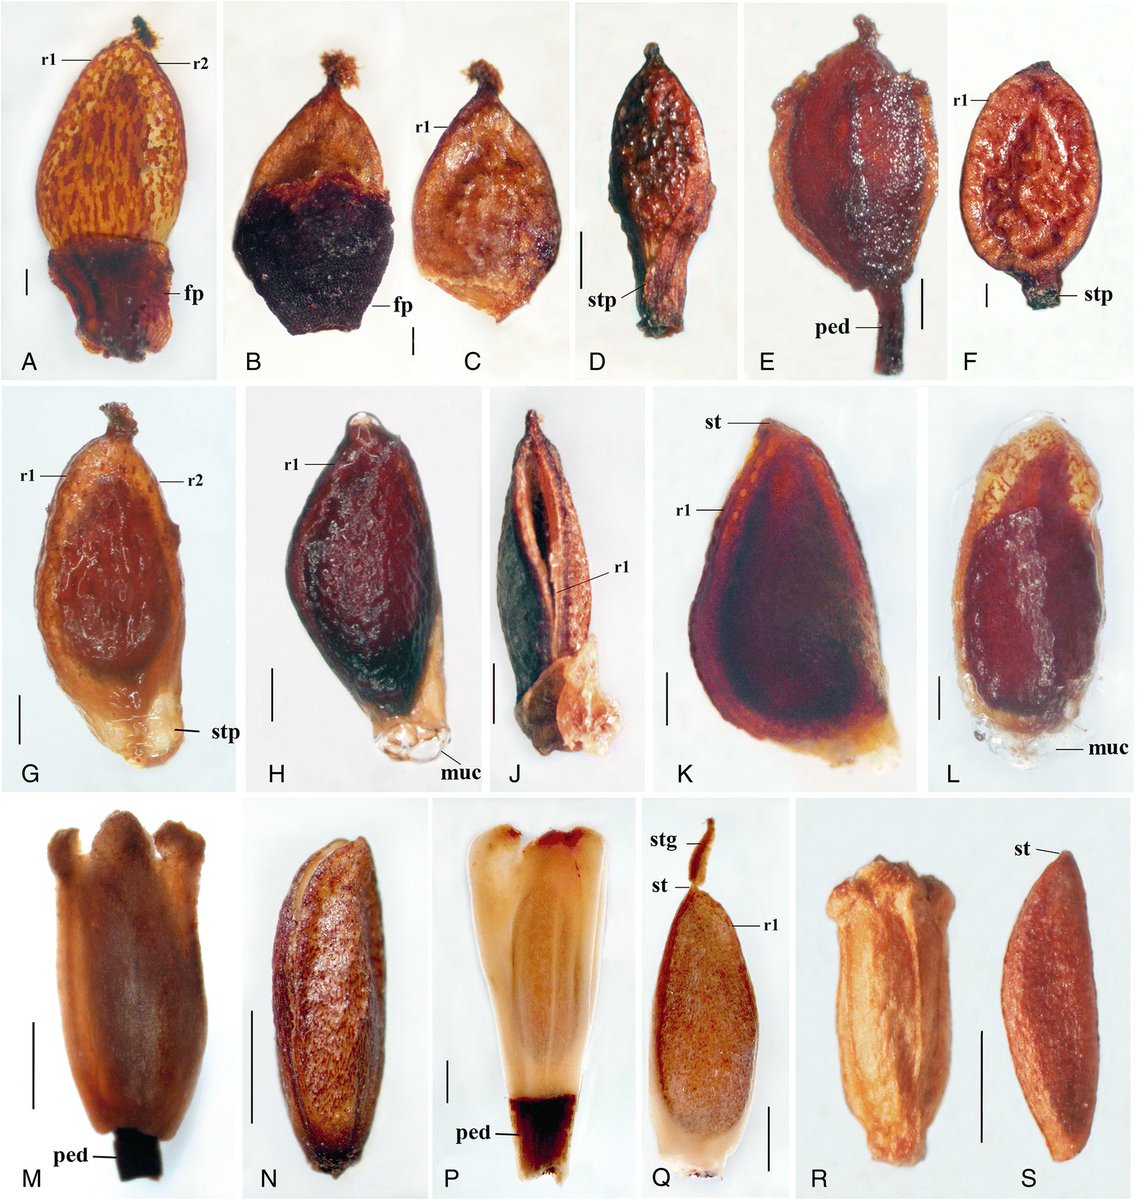 Carpology (from the greek καρπός = fruits) is the discipline of #botany devoted to study #seeds & #fruits which are critical in #plant systematic & taxonomic research. Check out this paper on fruits in the nettle family #Urticaceae #OpenAccess @KewBulletin doi.org/10.1007/s12225…